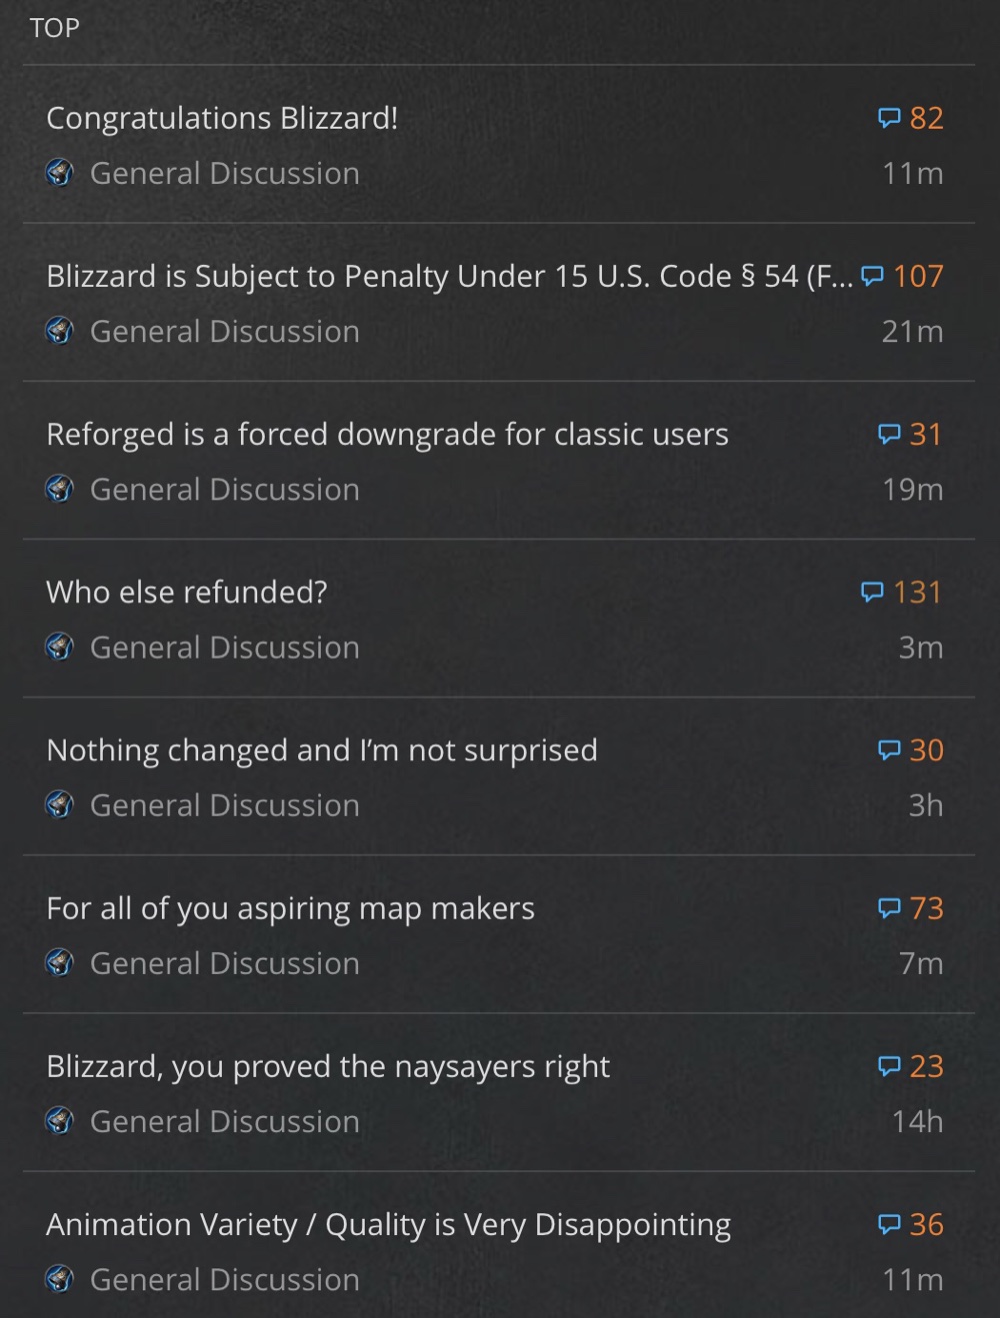 The official Warcraft 3 forum’s top posts are filled with complaints about Warcraft 3: Reforged